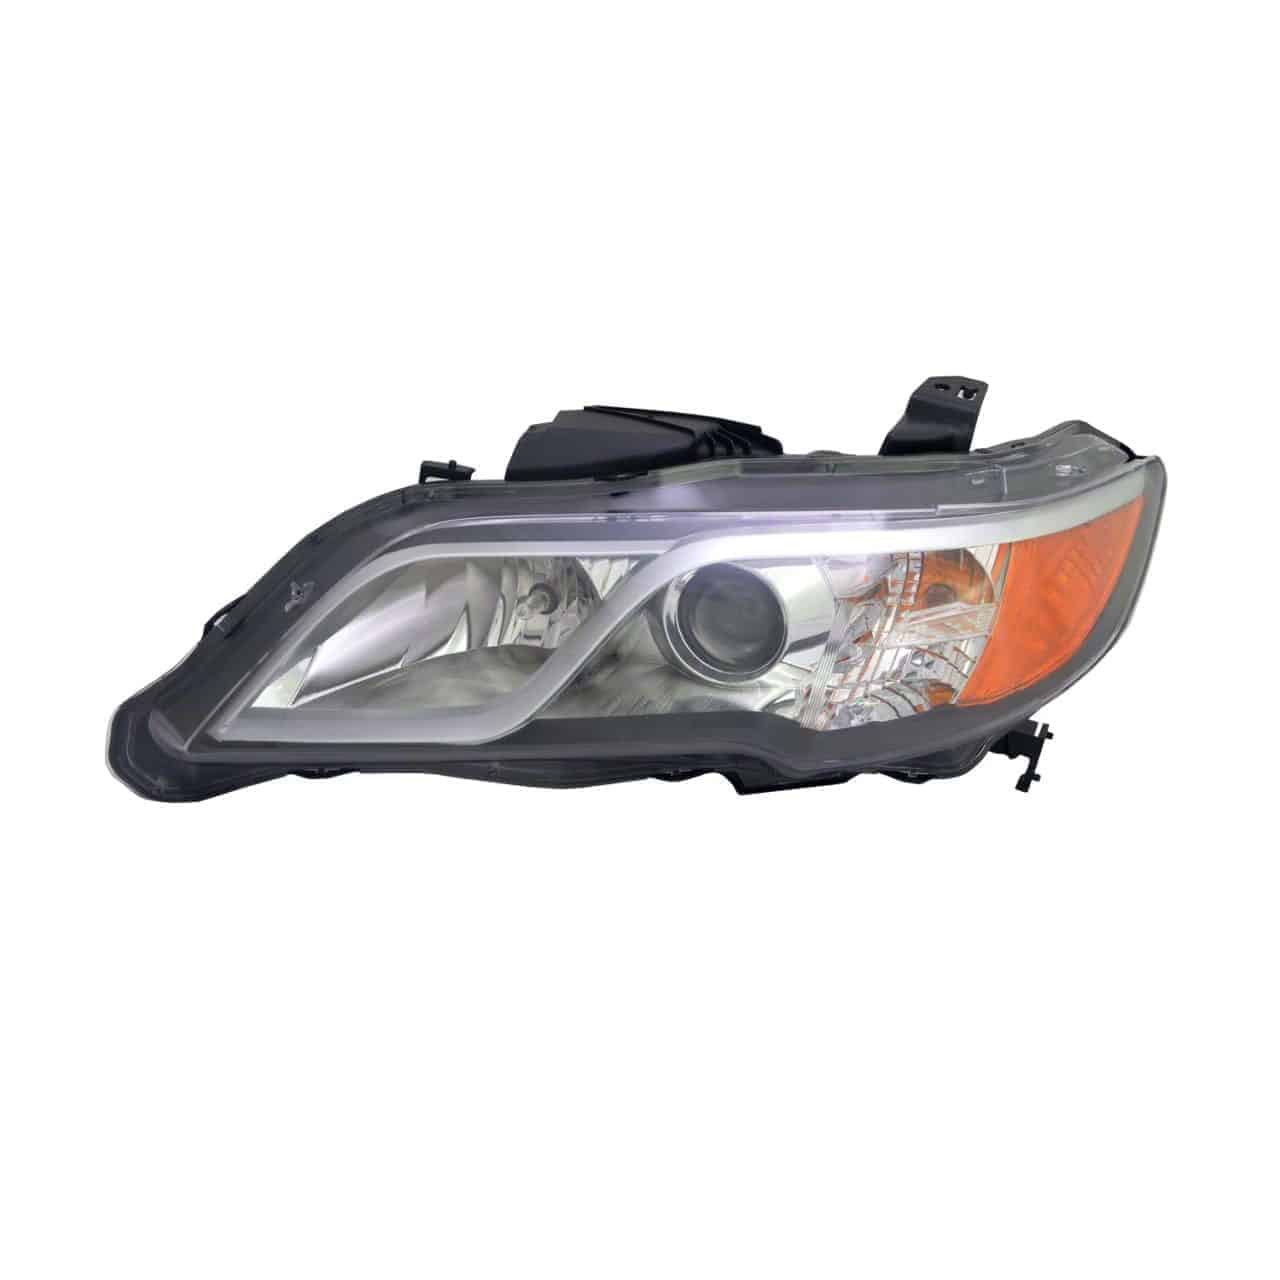 AC2502123C Front Light Headlight Assembly Driver Side